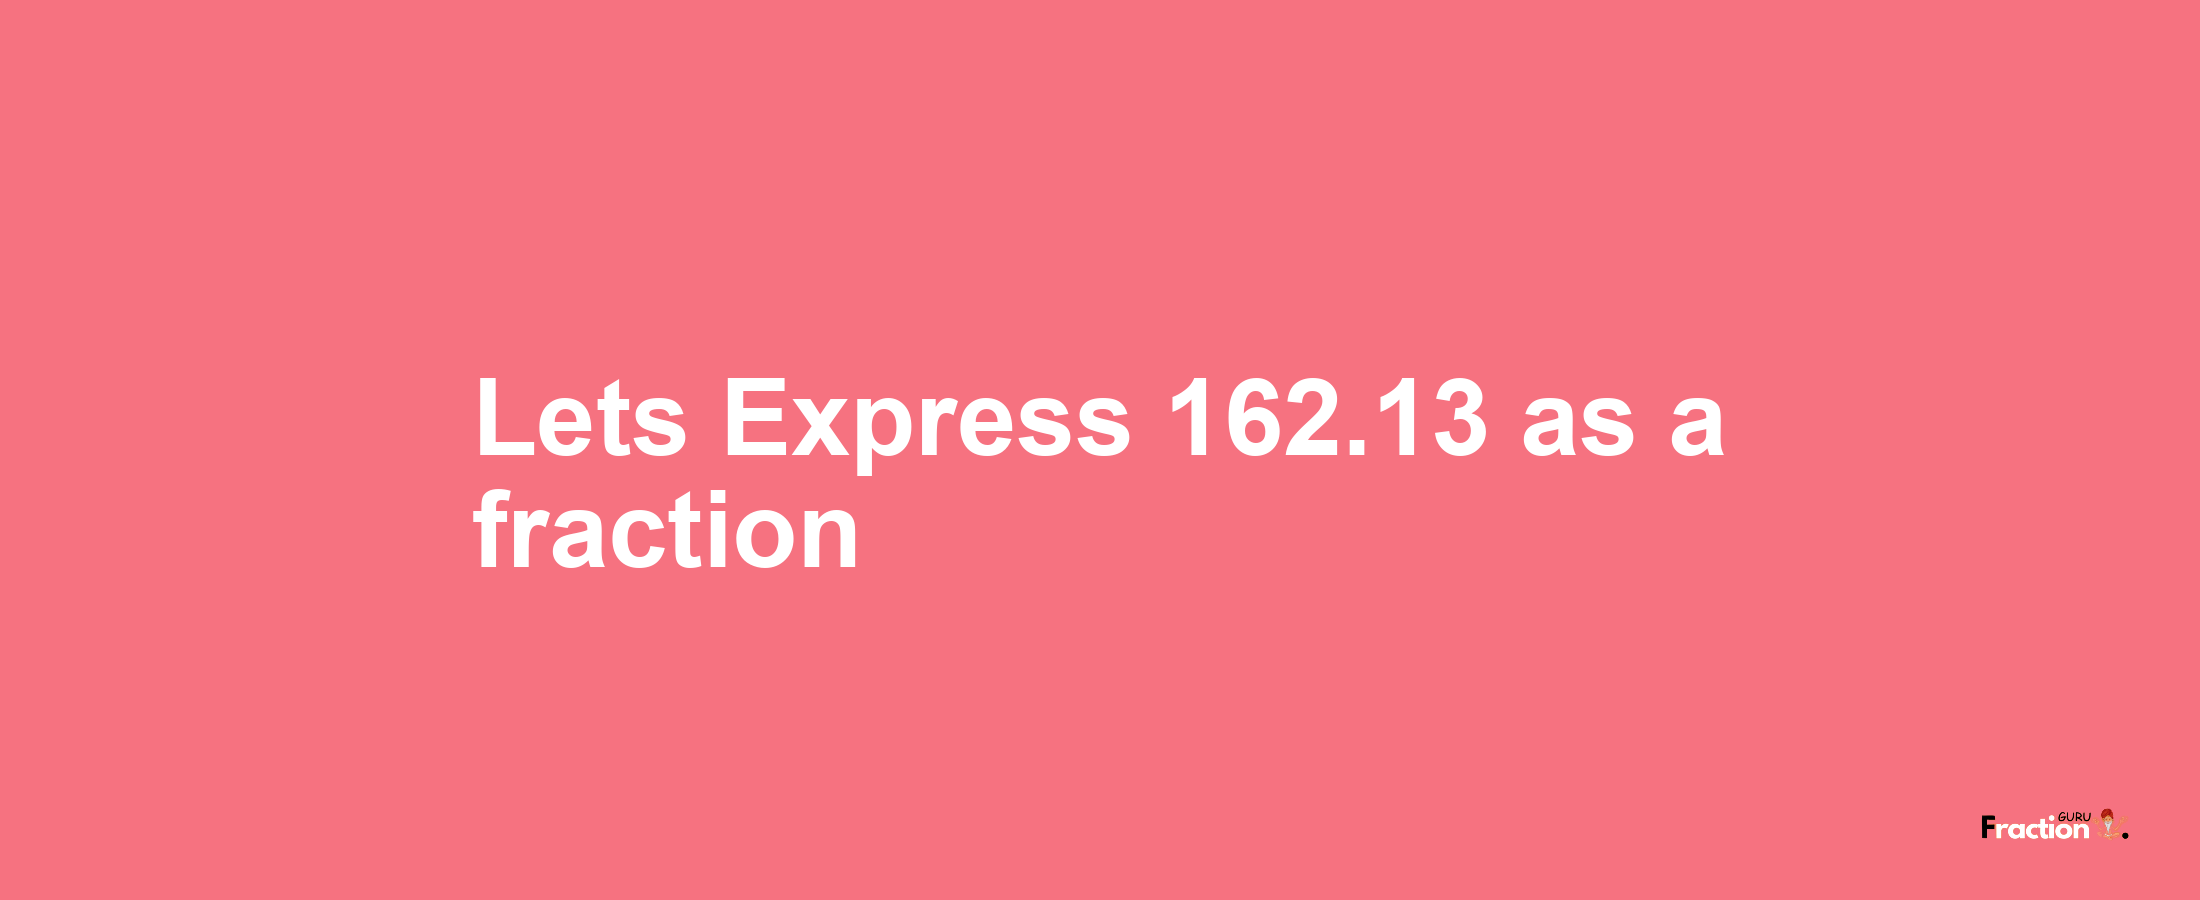 Lets Express 162.13 as afraction